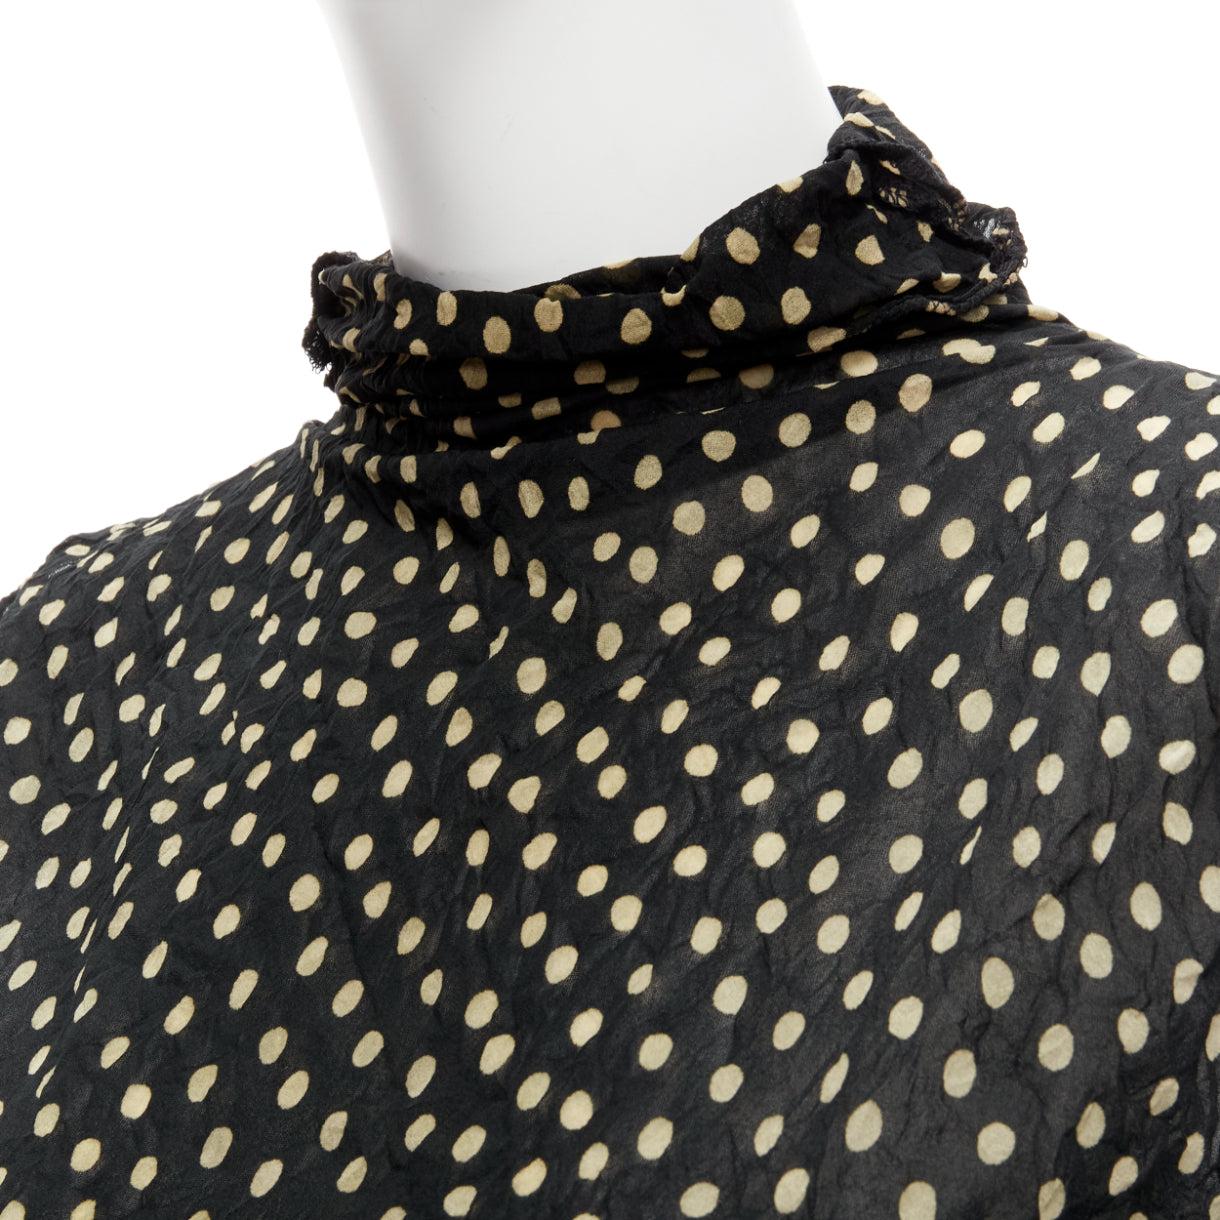 ISSEY MIYAKE Vintage black yellow polka dot crinkle sheer high neck vest top S
Reference: PYCN/A00089
Brand: Issey Miyake
Material: Polyester
Color: Black, Yellow
Pattern: Polka Dot
Closure: Pullover
Made in: Japan

CONDITION:
Condition: Excellent,